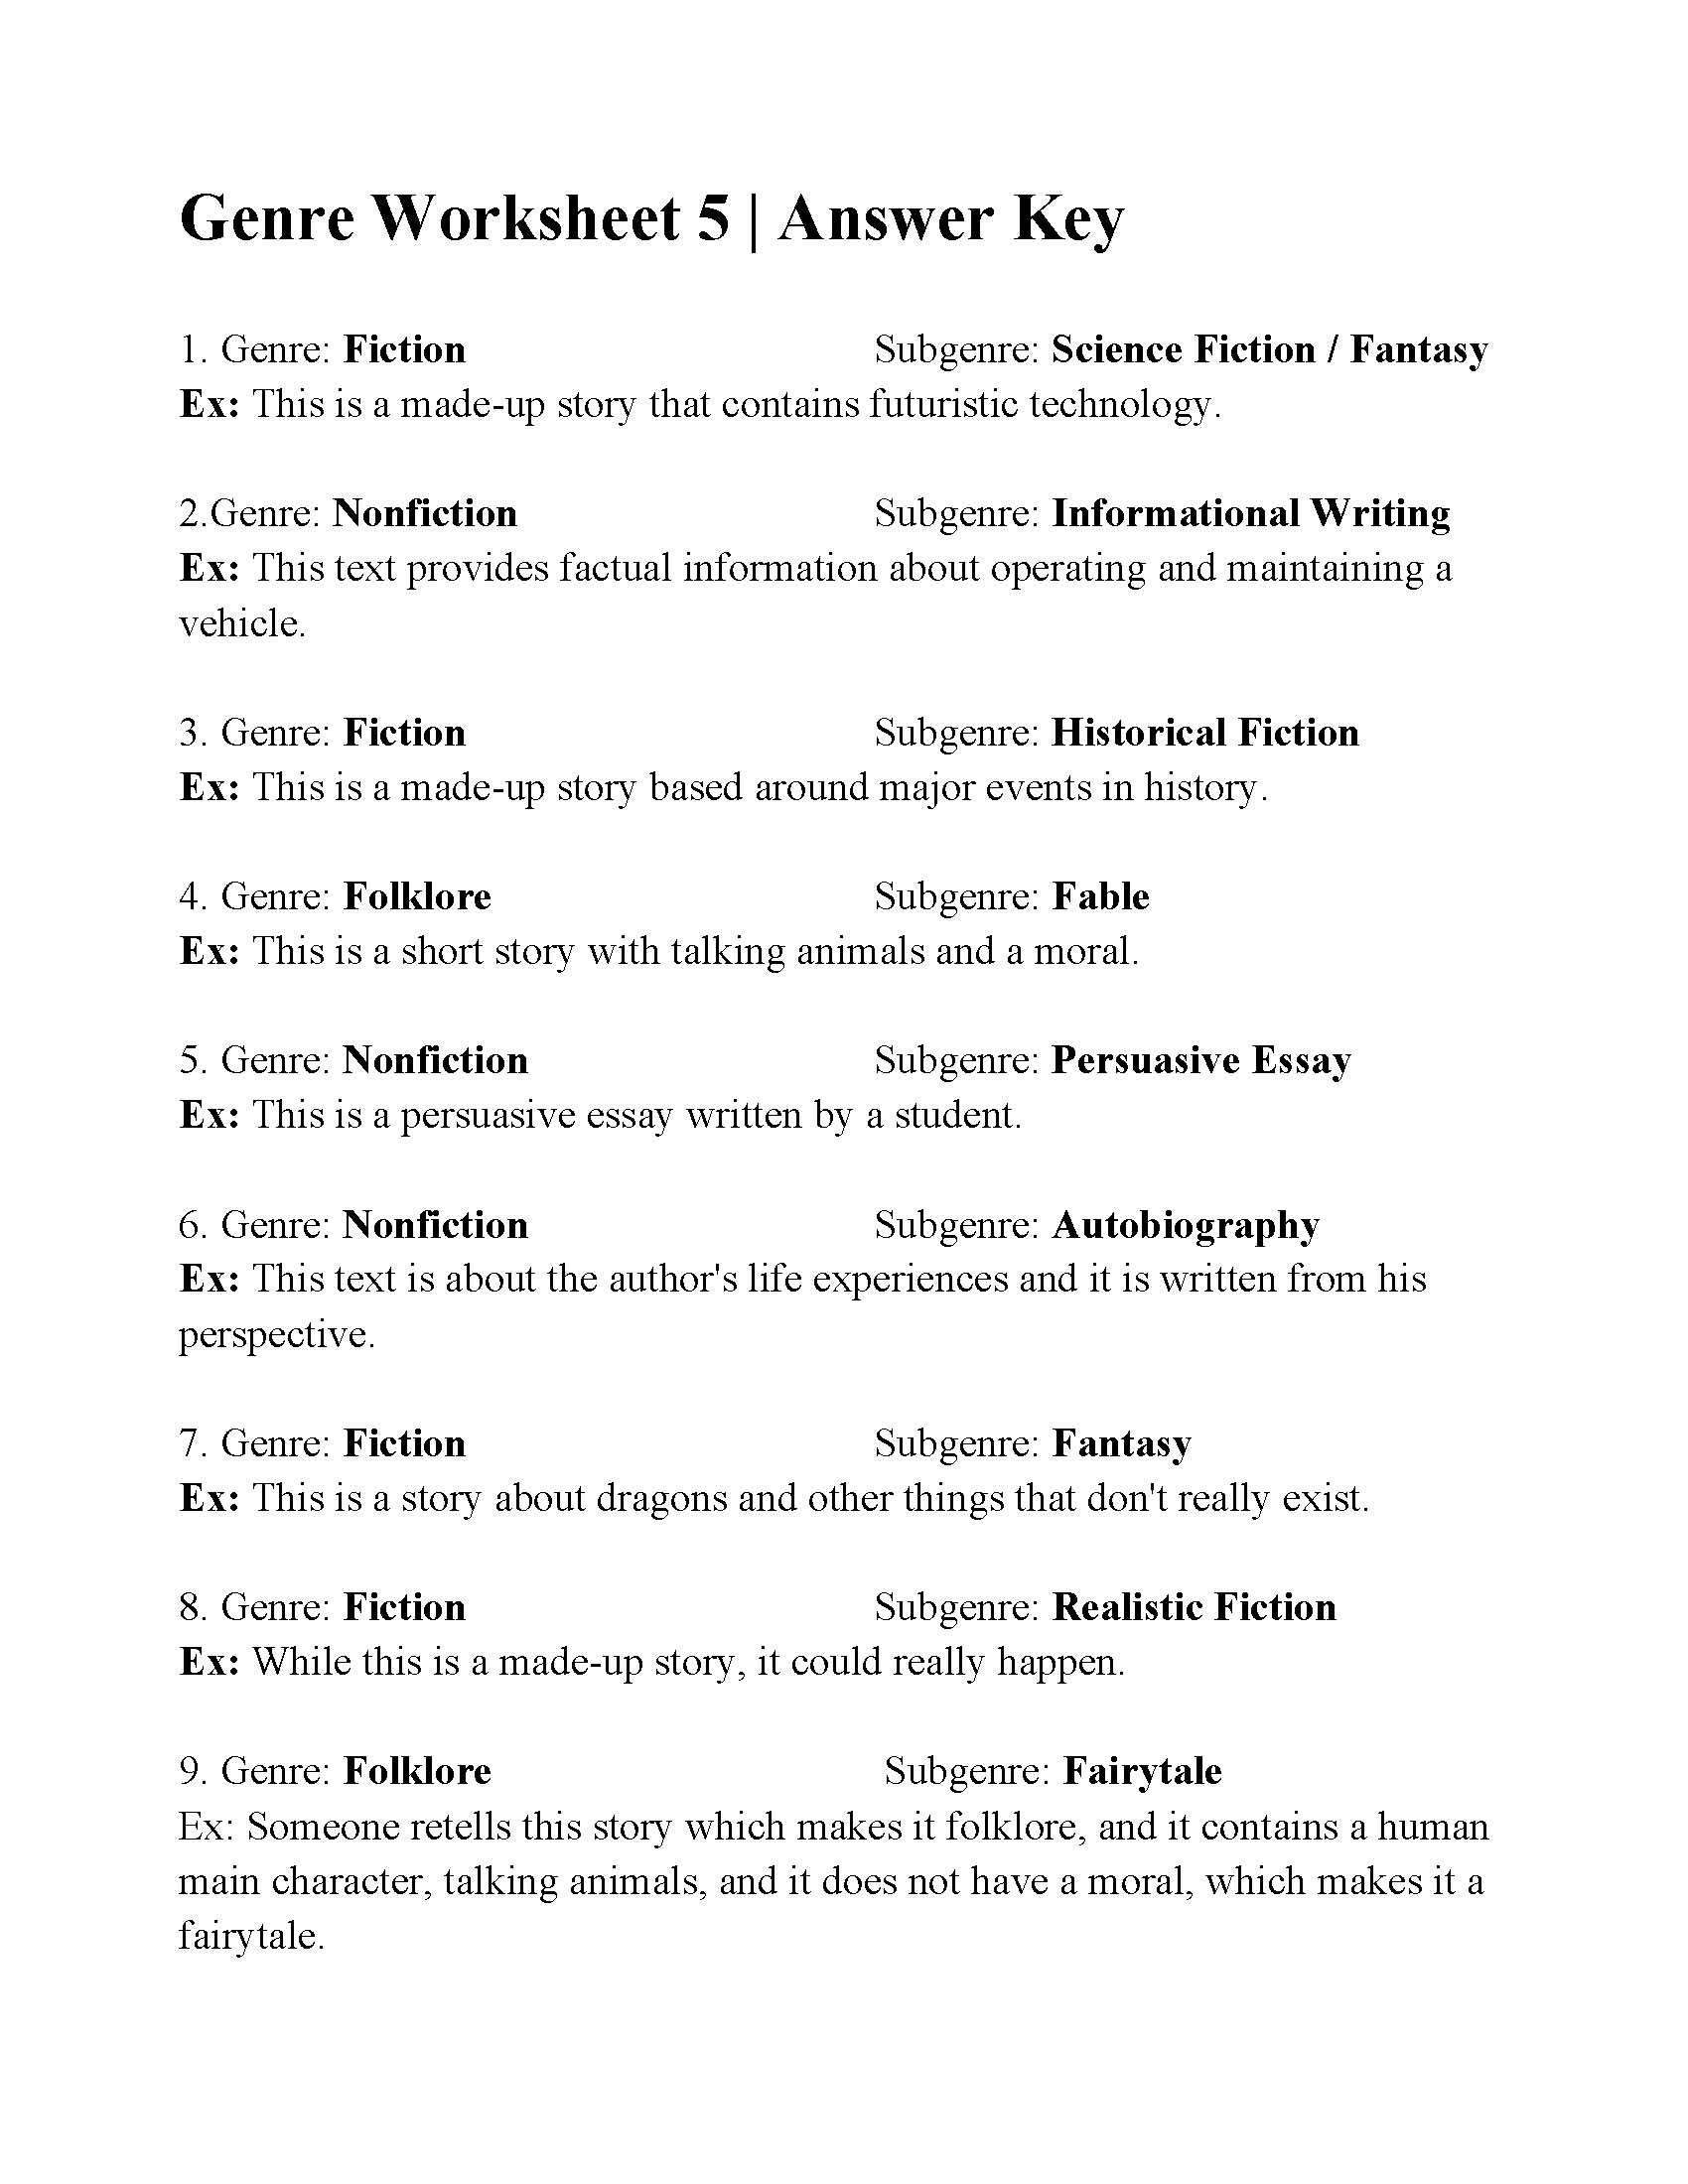 This is a preview image of Genre Worksheet 5. Click on it to enlarge it or view the source file.